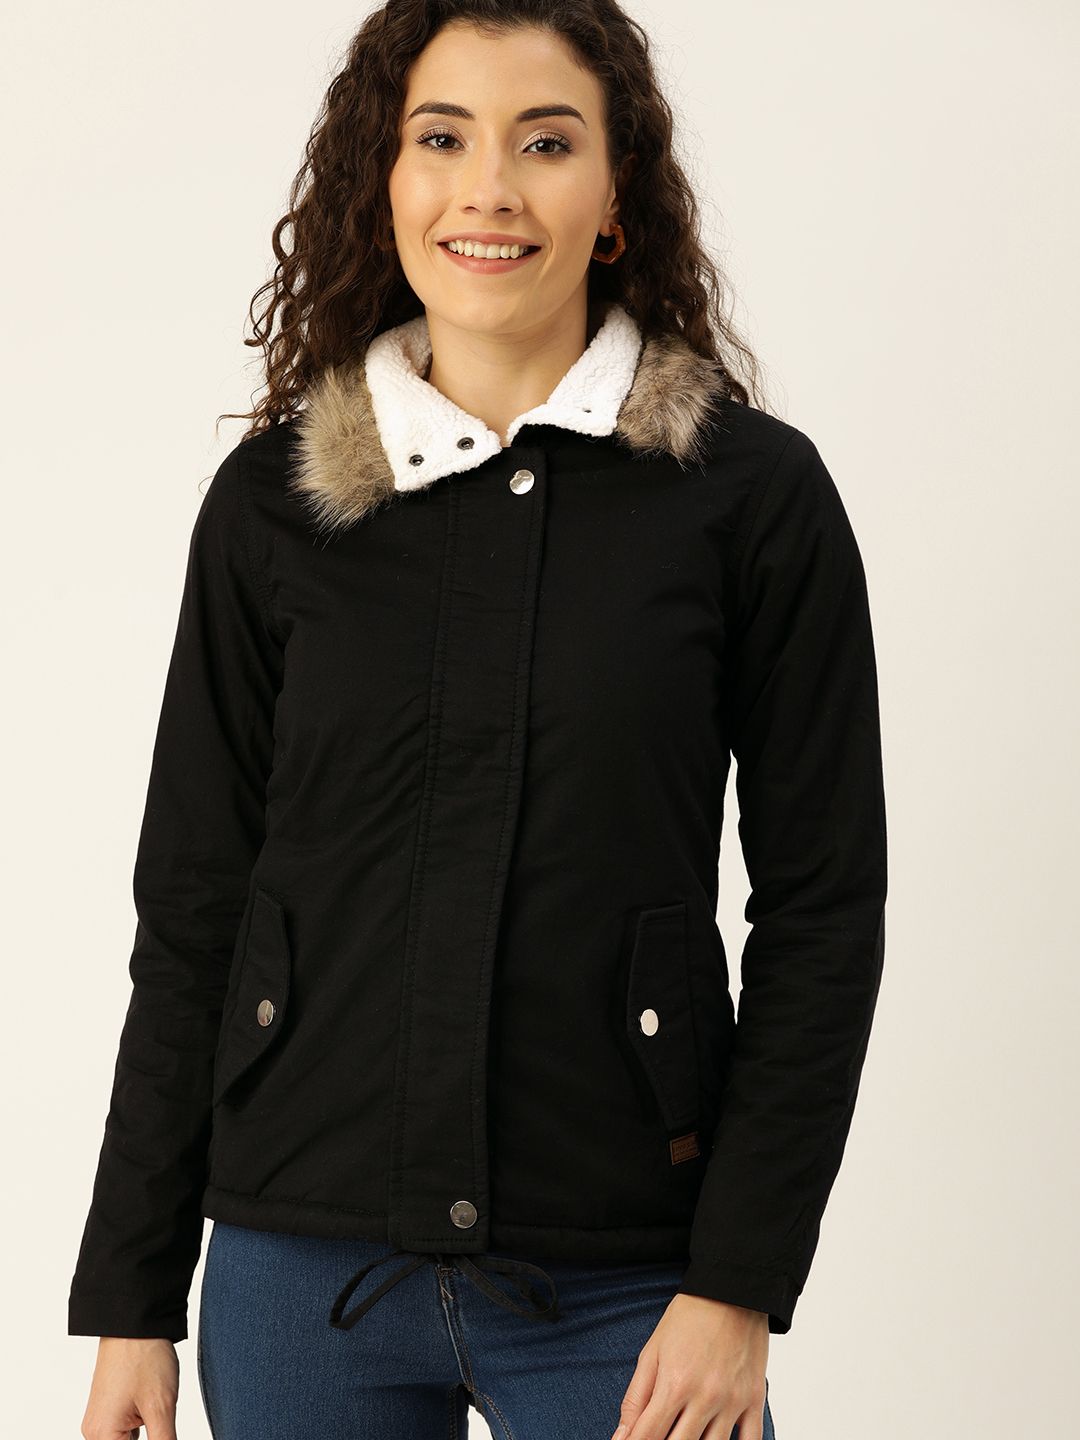 Campus Sutra Women Black Solid Windcheater Biker Jacket with Faux Fur Trim Detail Price in India